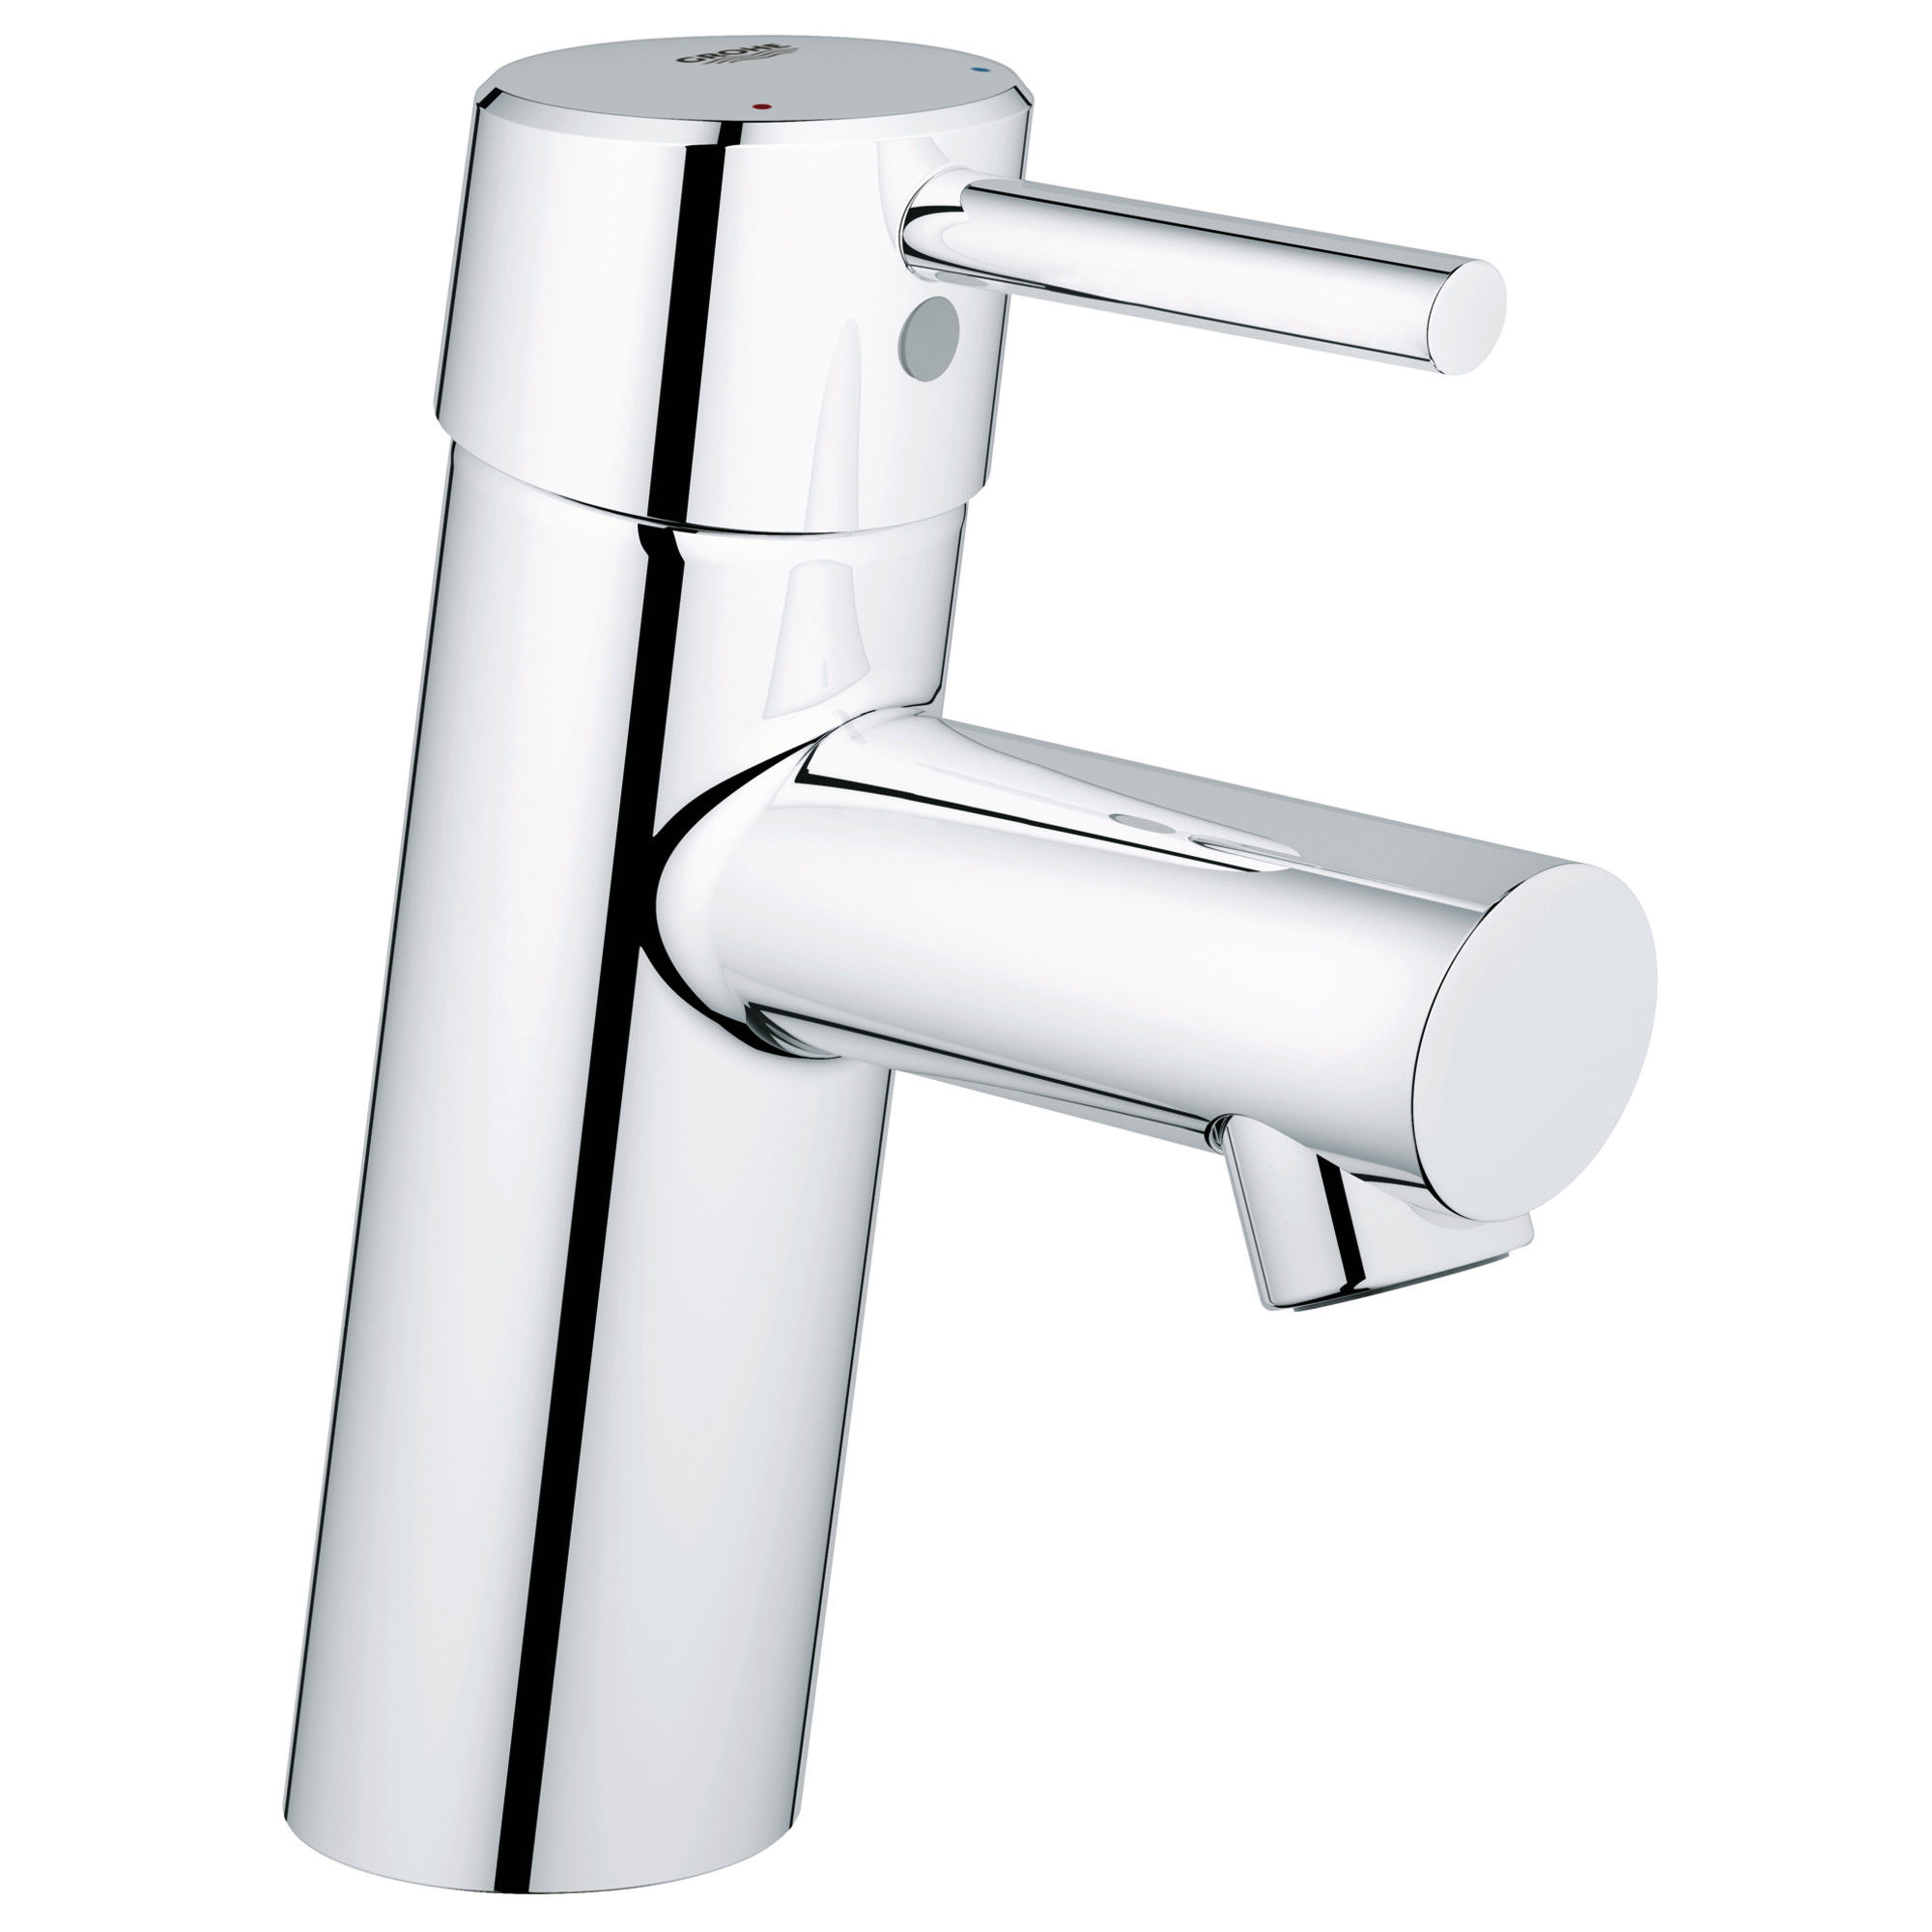 Grohe 3427100a Starlight Chrome Concetto 1 2 Gpm New Bathroom Faucet With Silkmove Cartridge Less Drain Assembly Faucetdirect Com - Grohe Bathroom Sink Faucet Cartridge